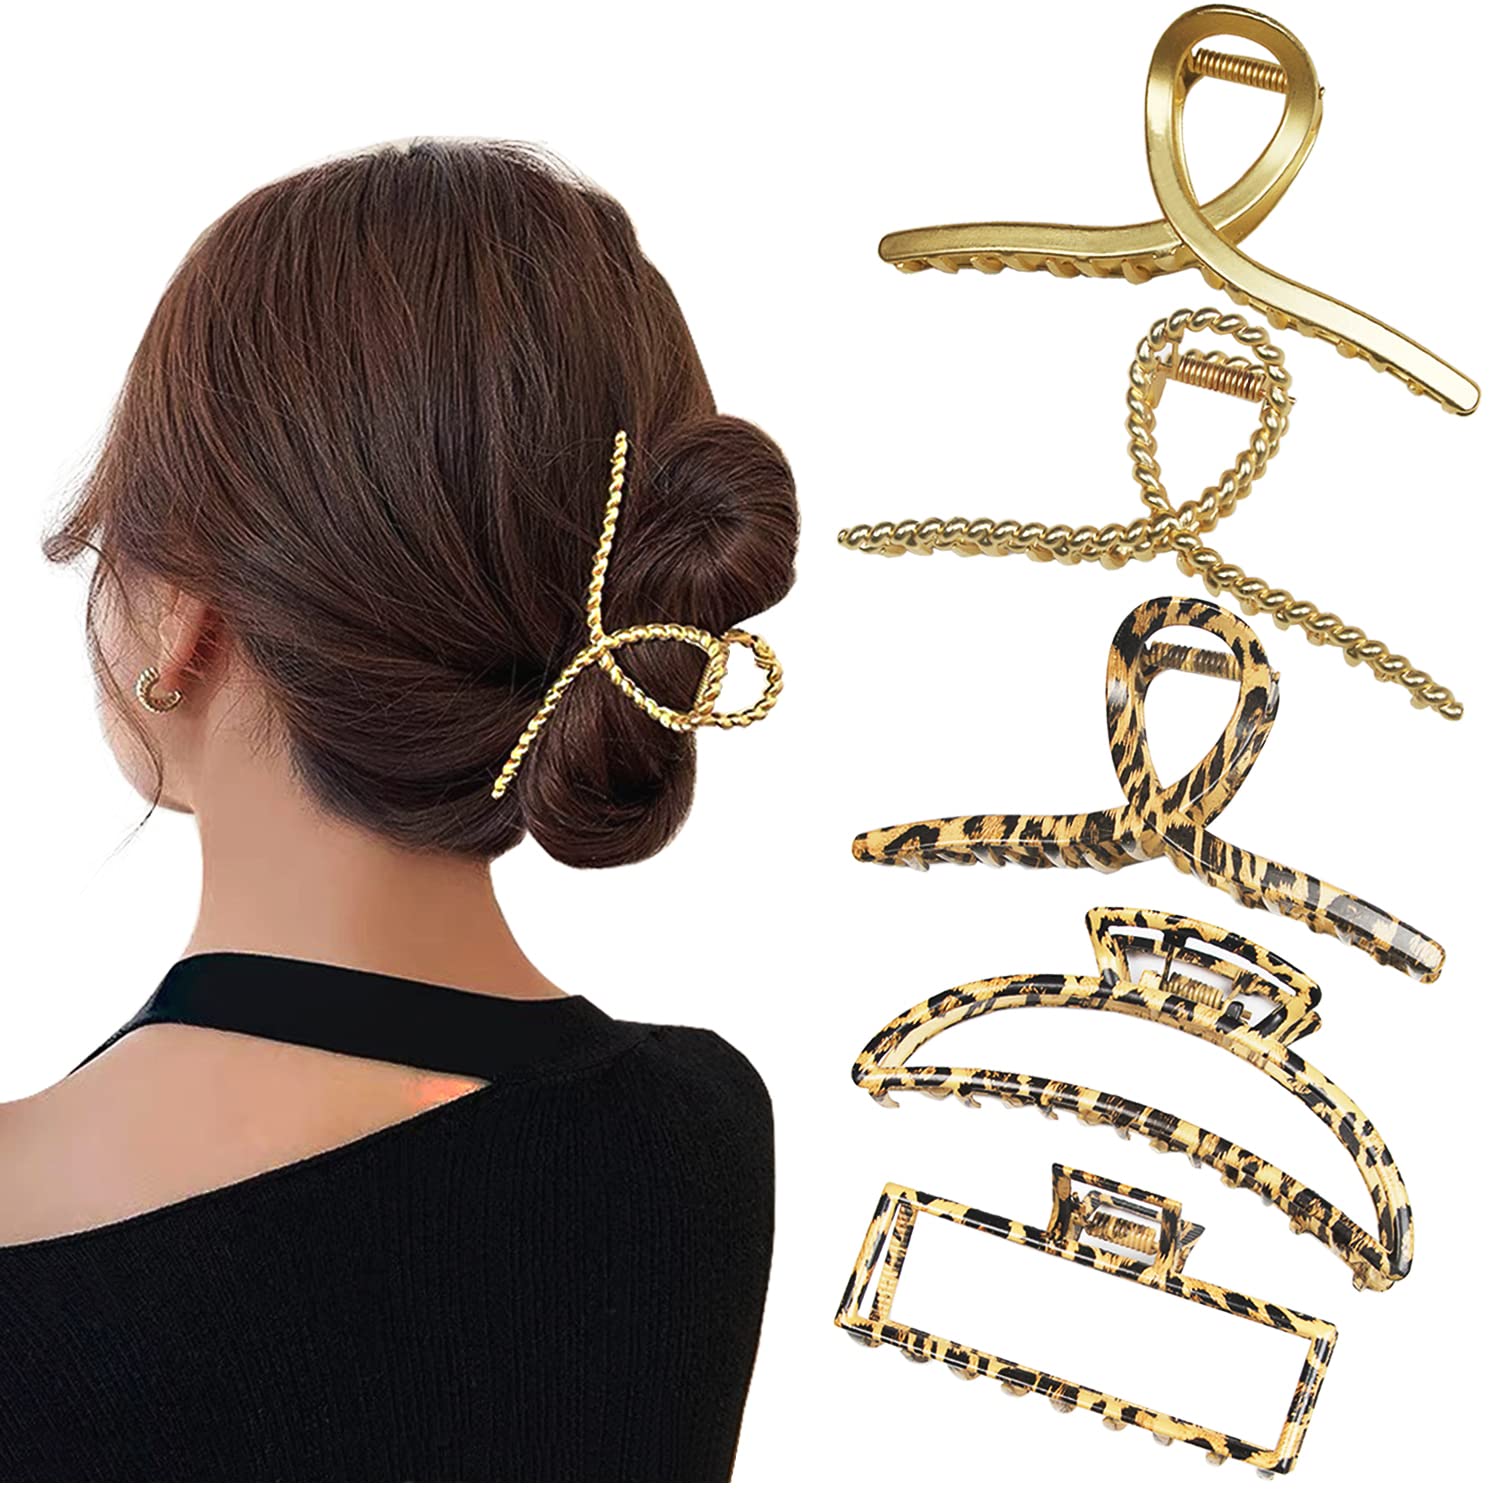 5 Pcs Large Metal Claw Clip 4.5 Inch Claw Clips for Thick Hair